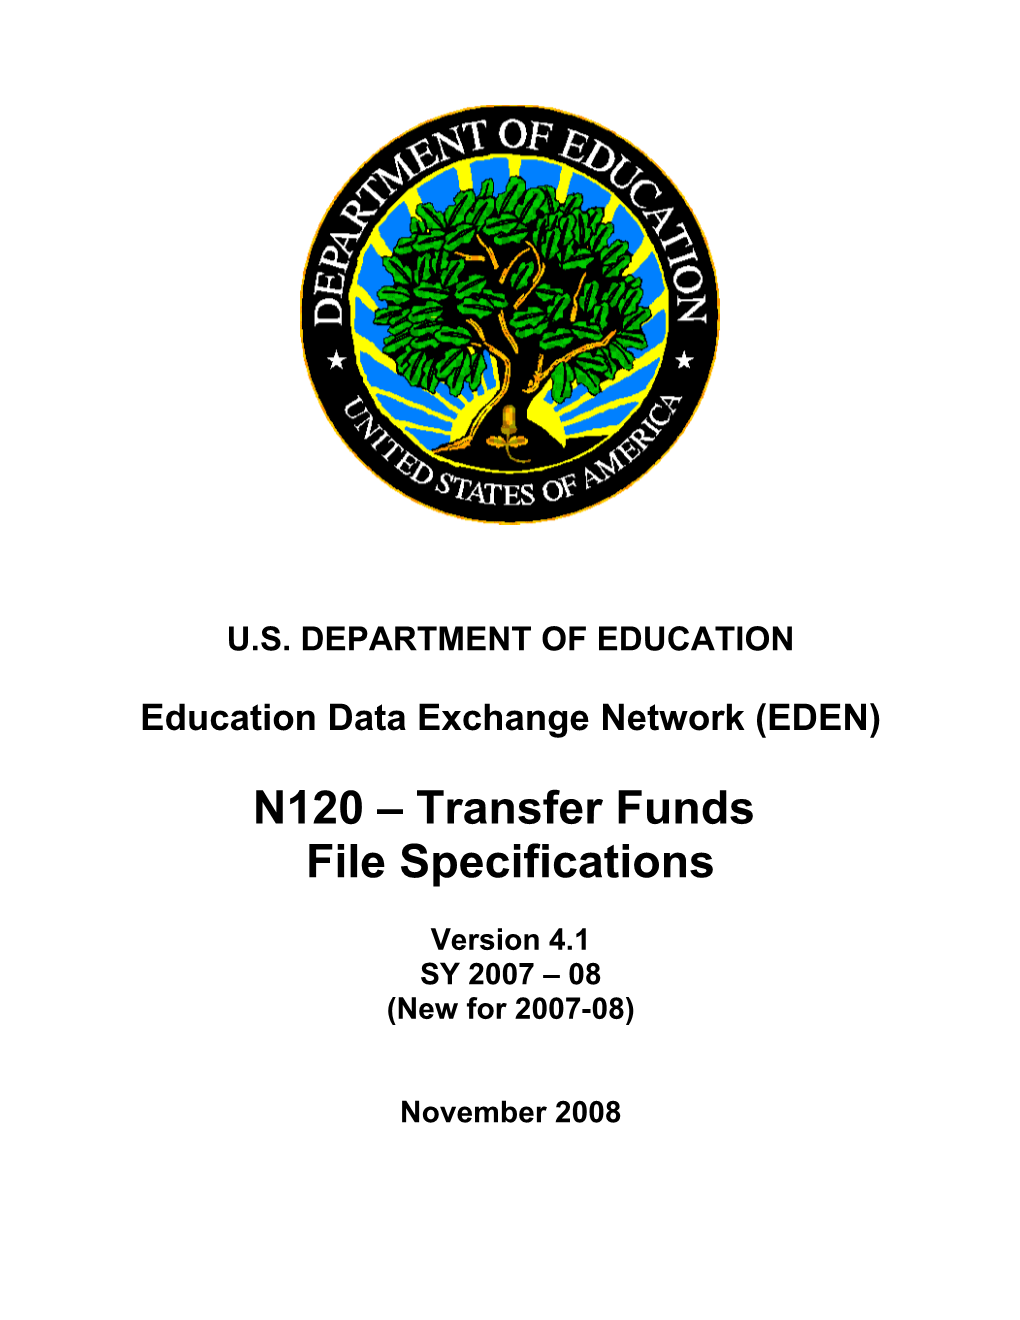 N120 Transfer Funds File Specifications Version 4.1 ( MS Word)